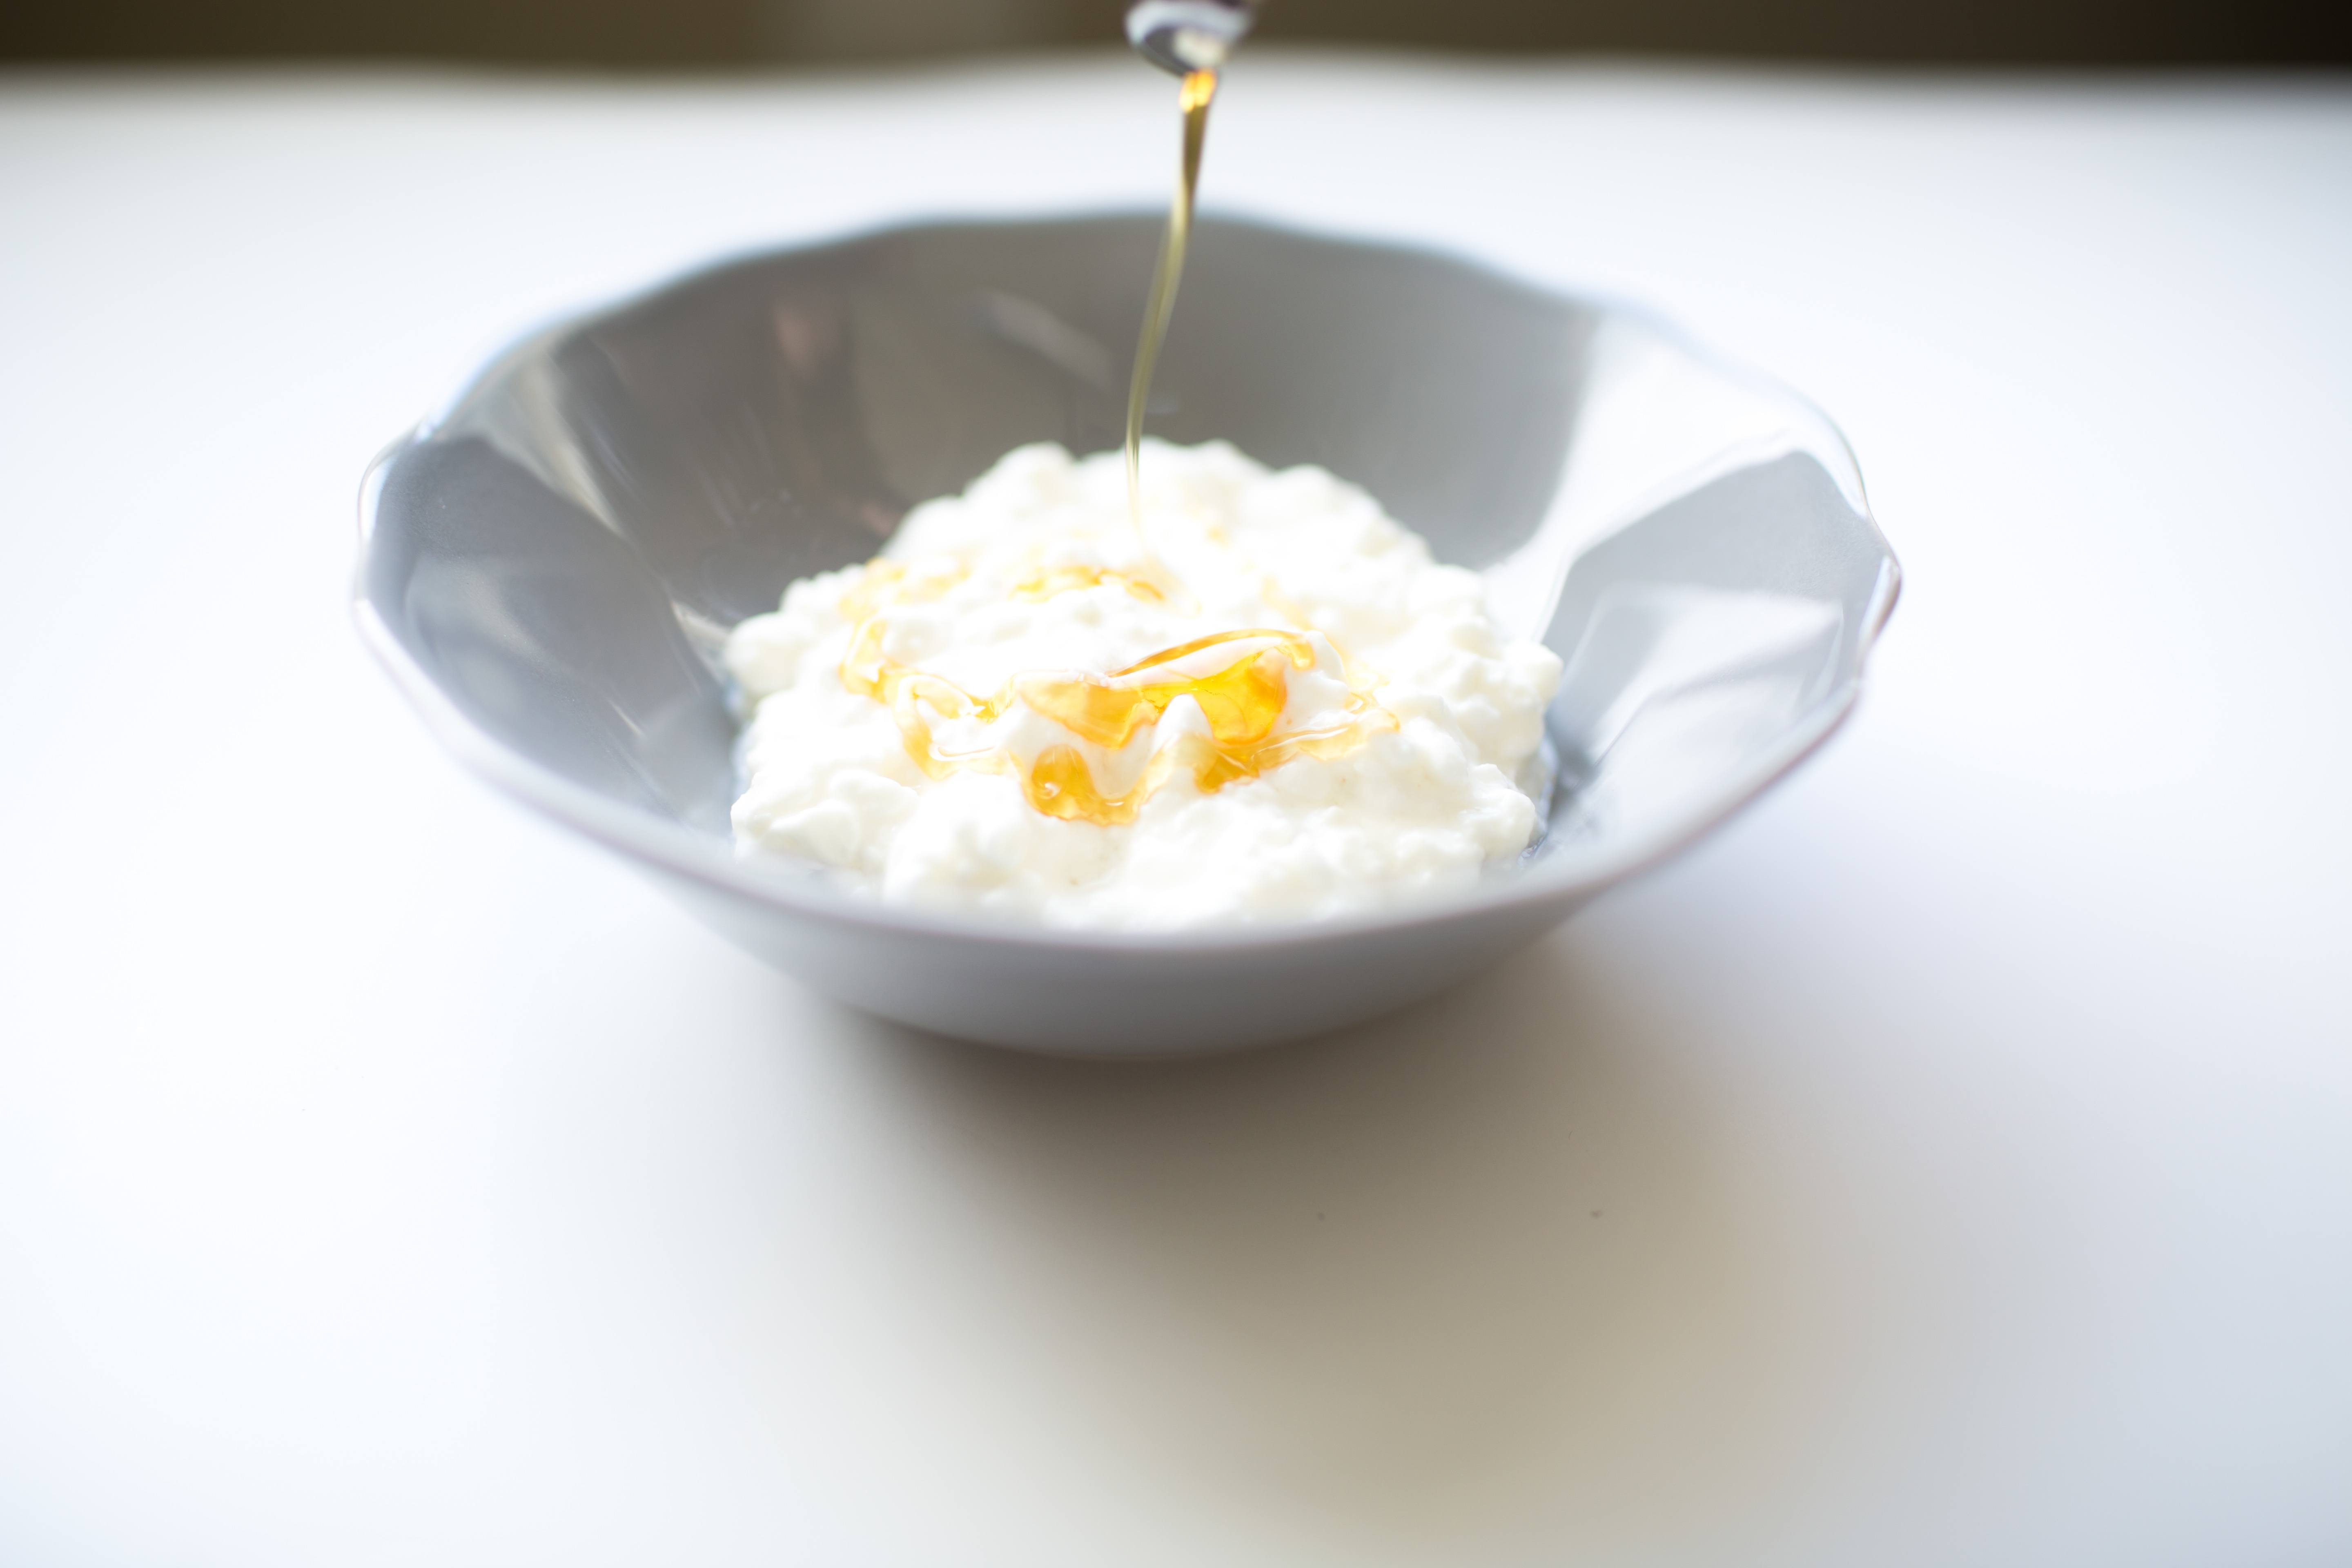 100 calorie snack fat free cottage cheese with honey